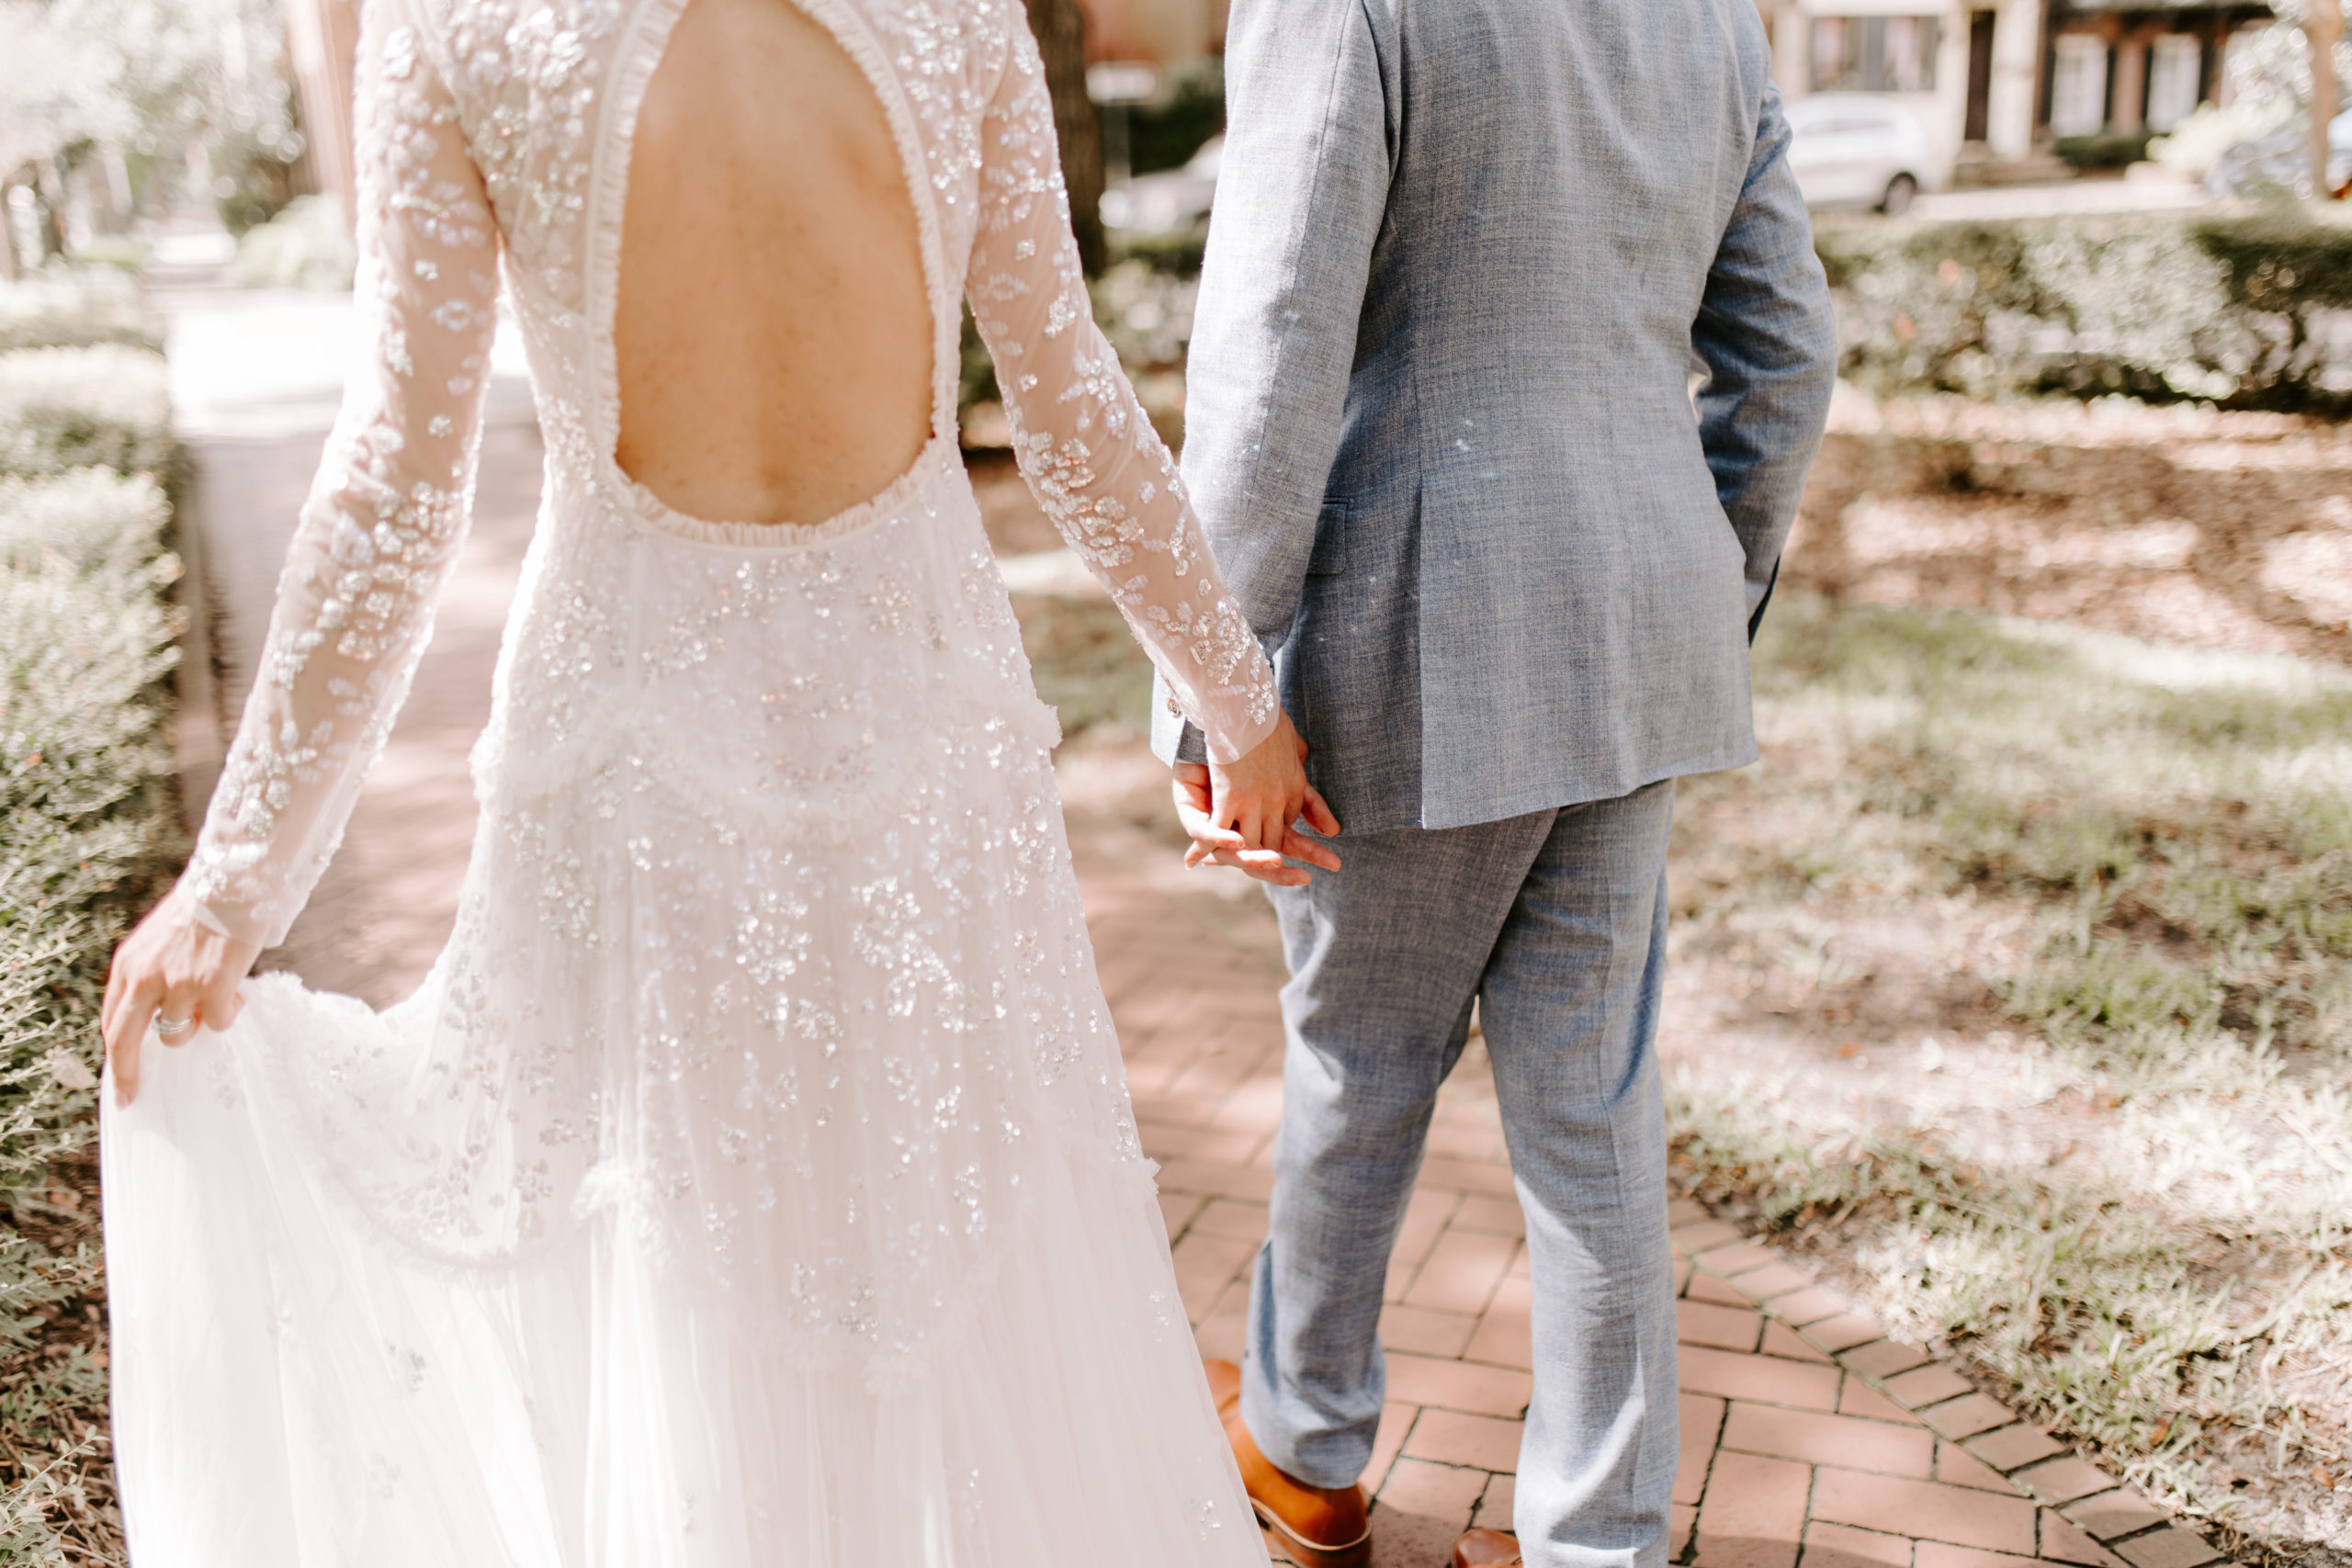 A private, midday late summer elopement for two on Troup Square in Savannah, filled with love and intimacy and sweet Southern charm by Kara McCurdy Photography